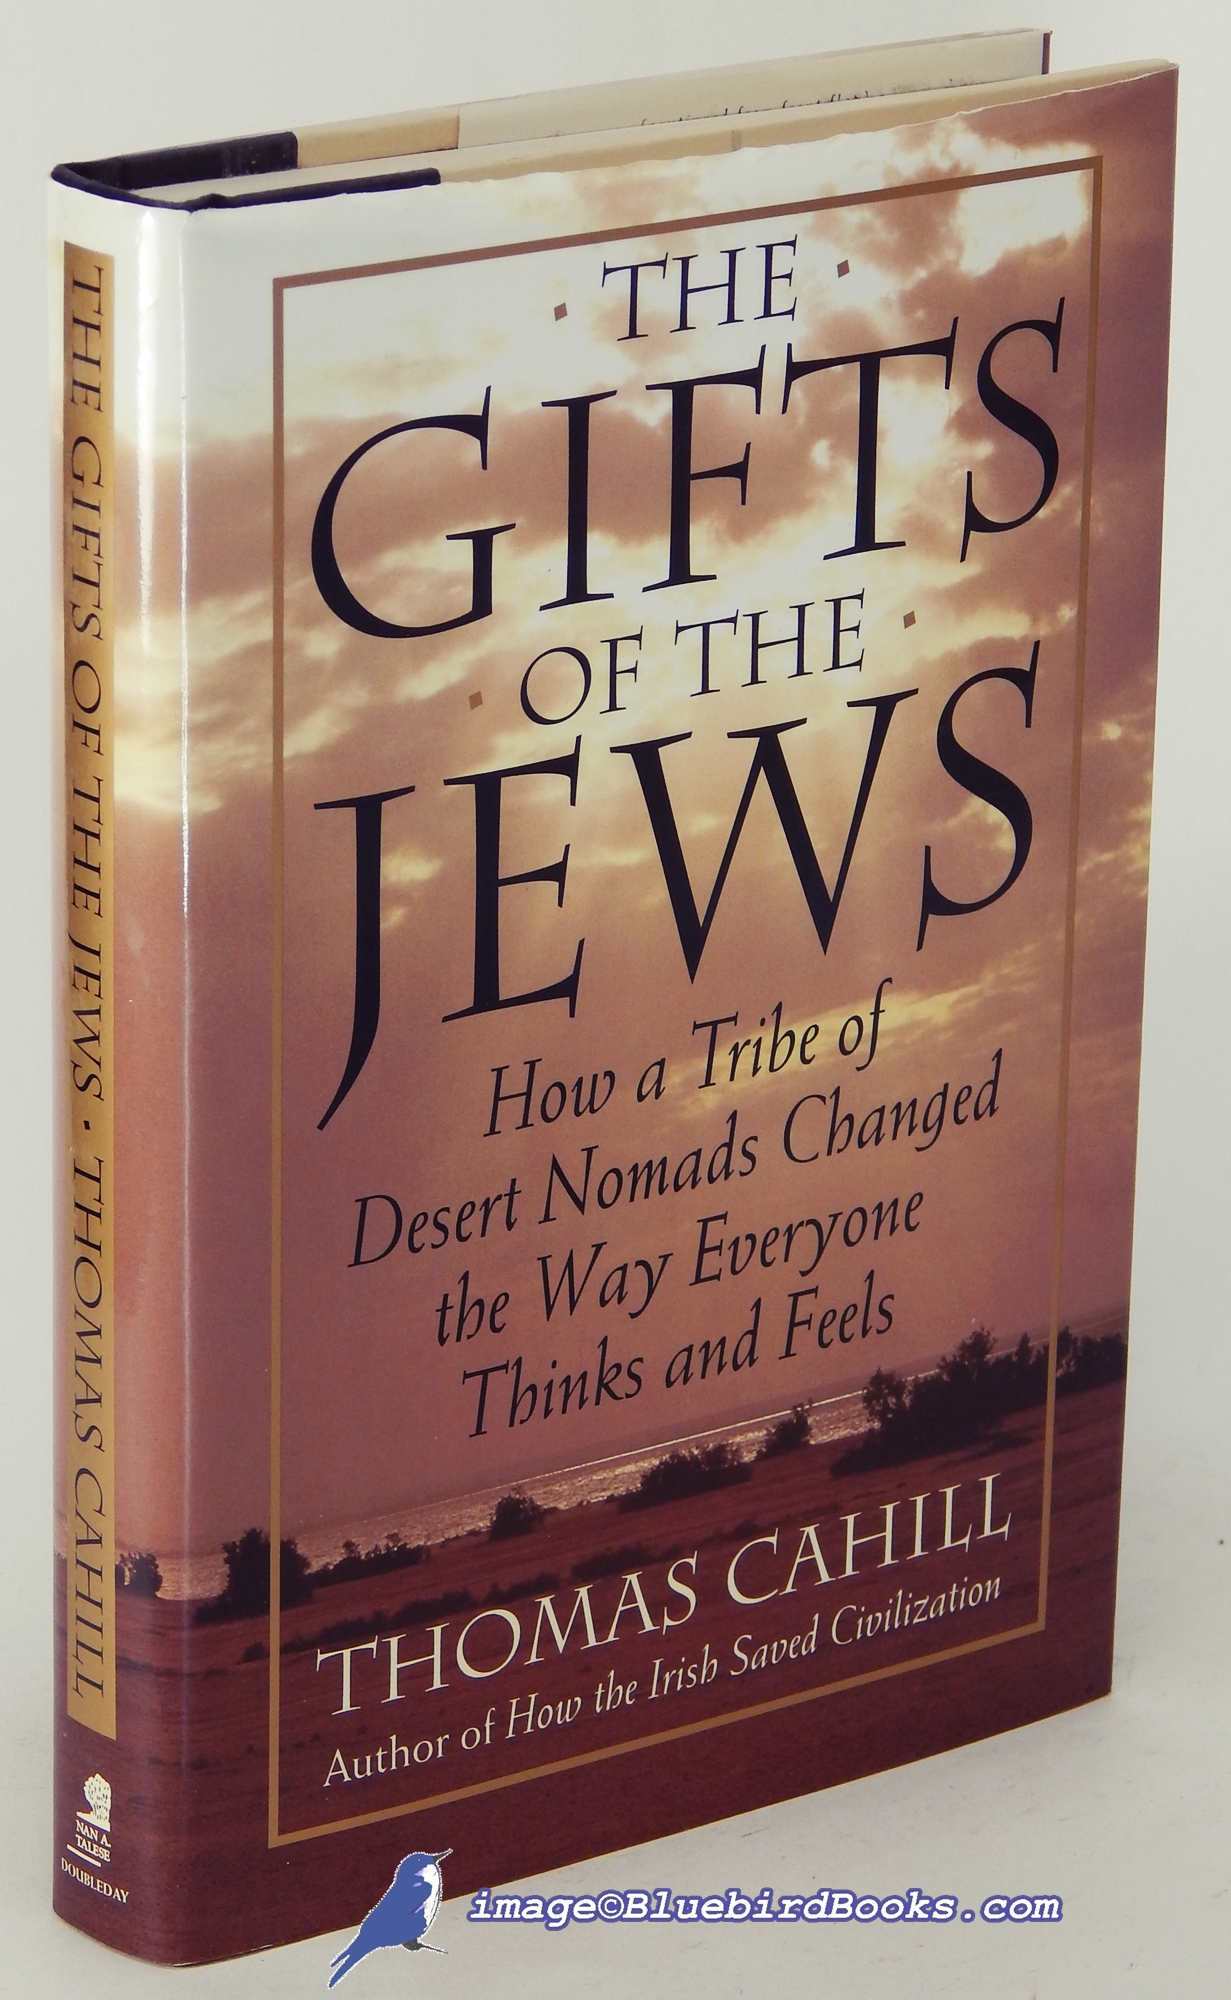 CAHILL, THOMAS - The Gifts of the Jews: How a Tribe of Desert Nomads Changed the Way Everyone Thinks and Feels (the Hinges of History Series)